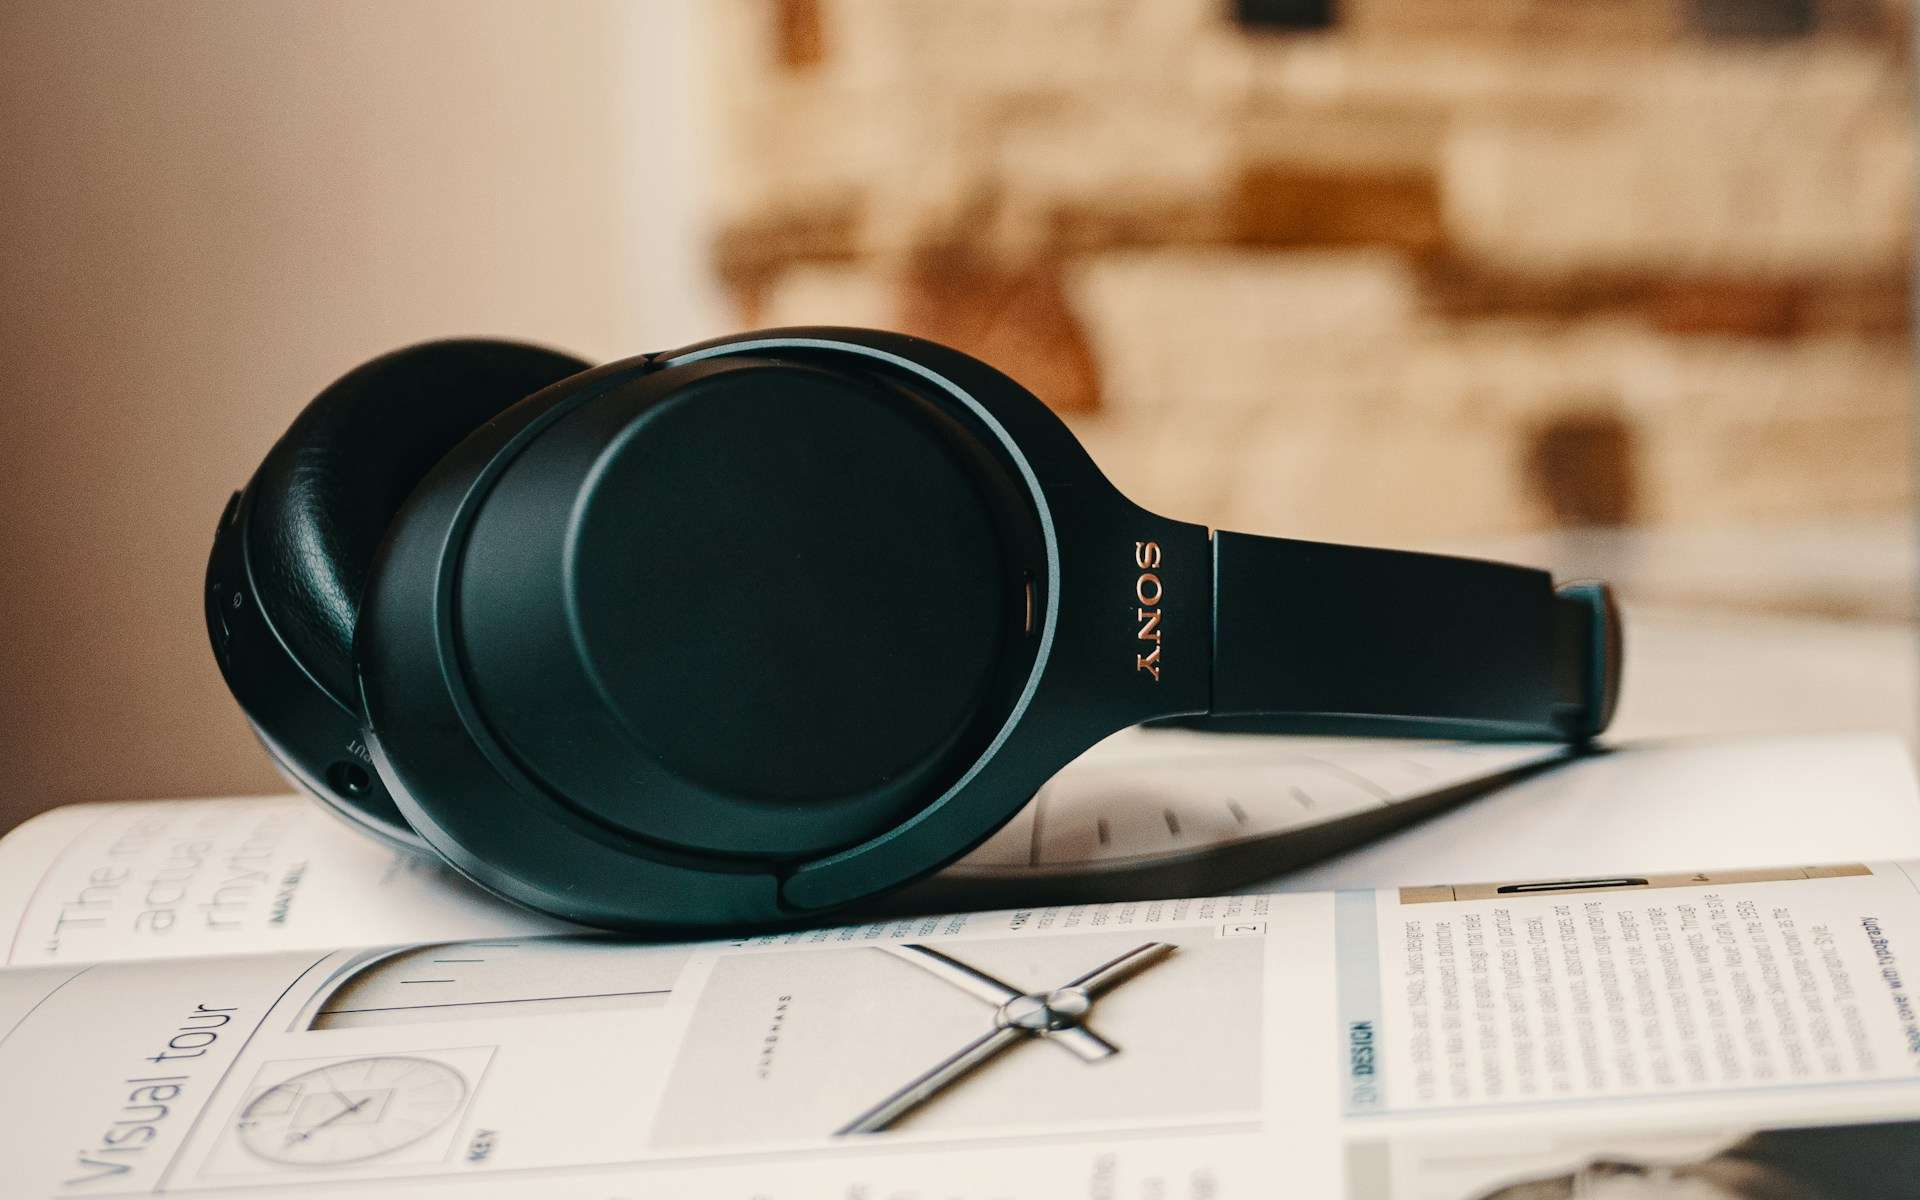 How to Turn on Noise Cancelling on Sony WH-1000XM5